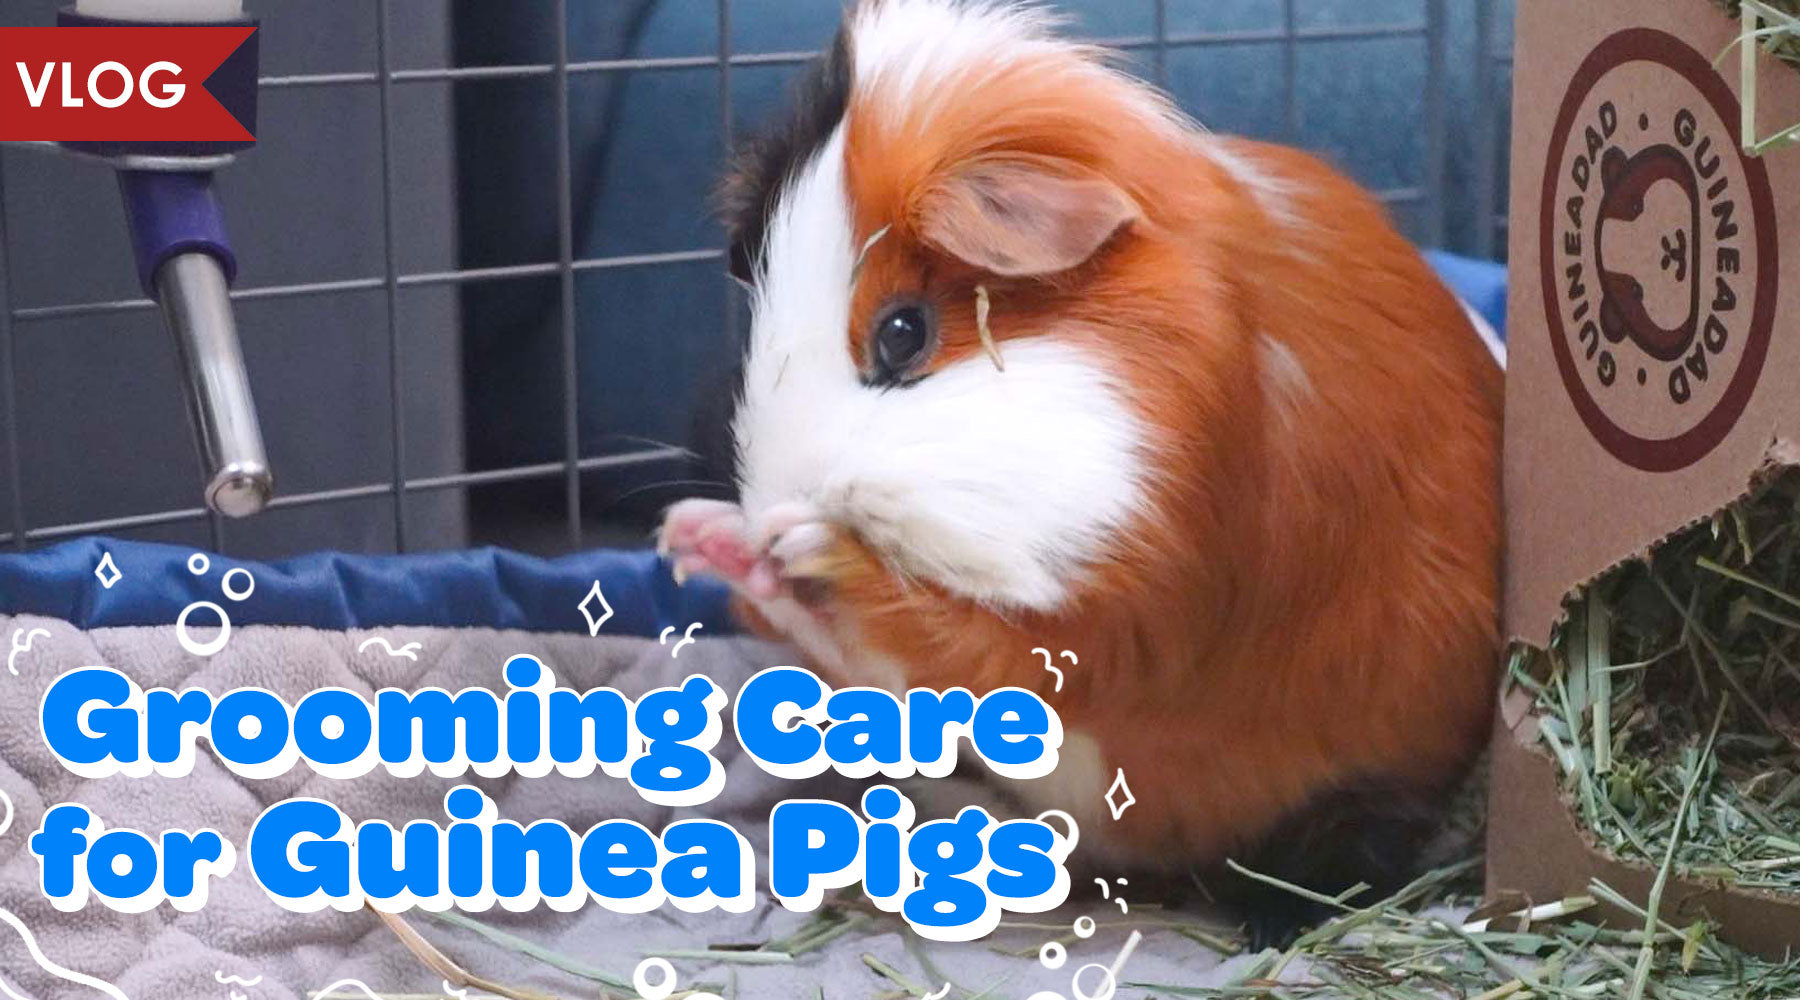 Step-by-Step Guide on How to Cut Your Guinea Pig's Nails